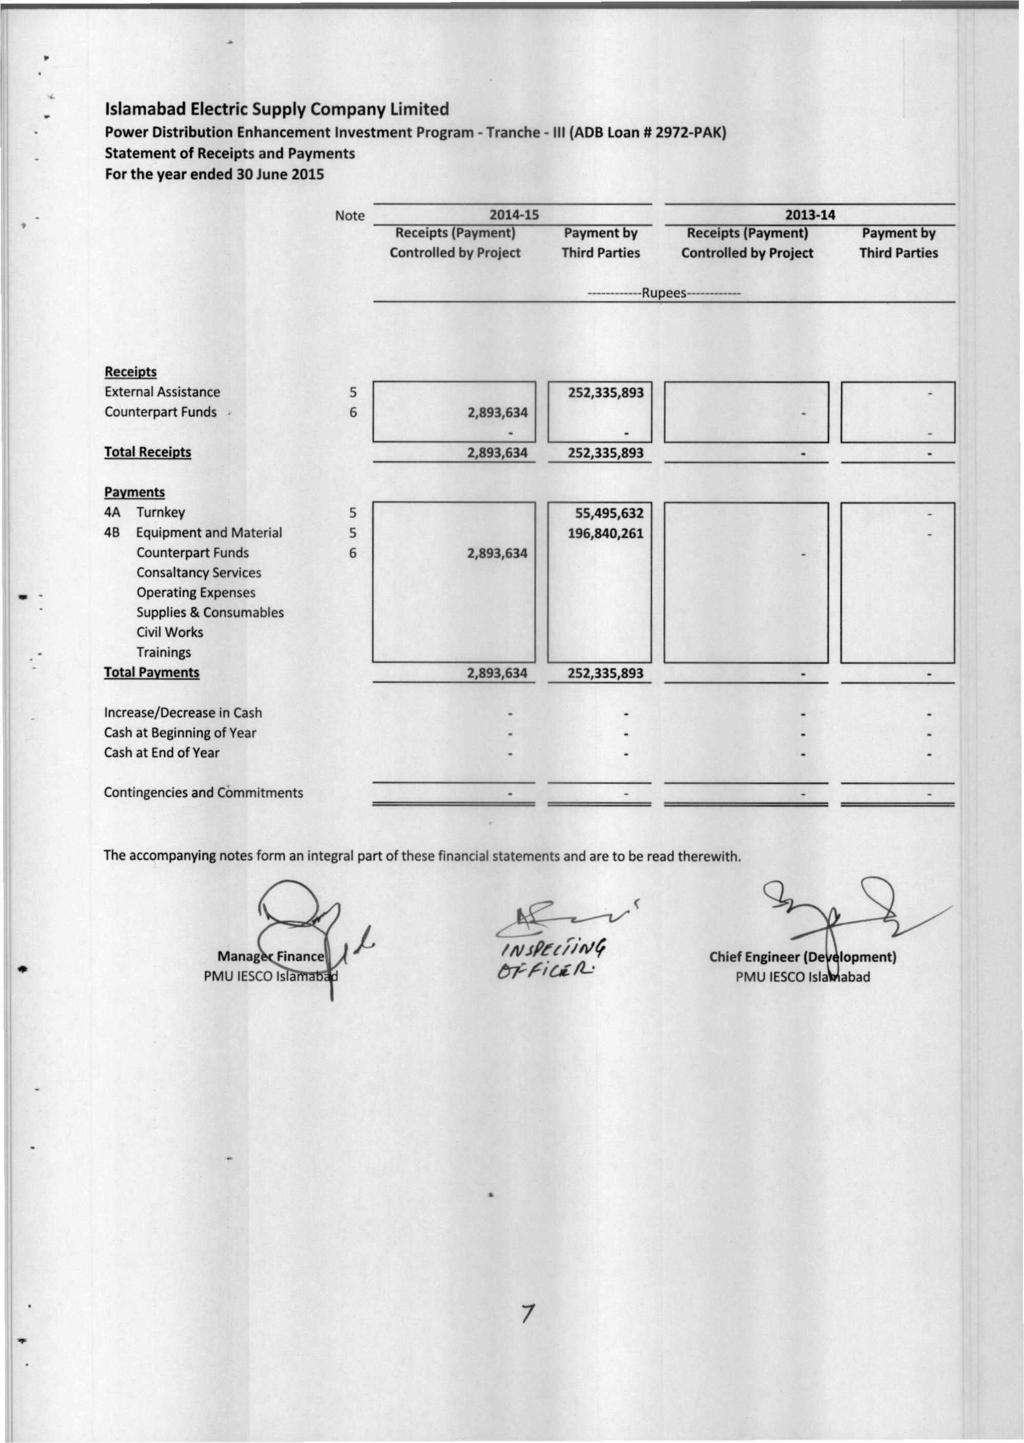 Islamabad Electric Supply Company Limited Power Distribution Enhancement Investment Program - Tranche - III (ADB Loan # 2972-PAK) Statement of Receipts and Payments For the year ended 30 June 2015